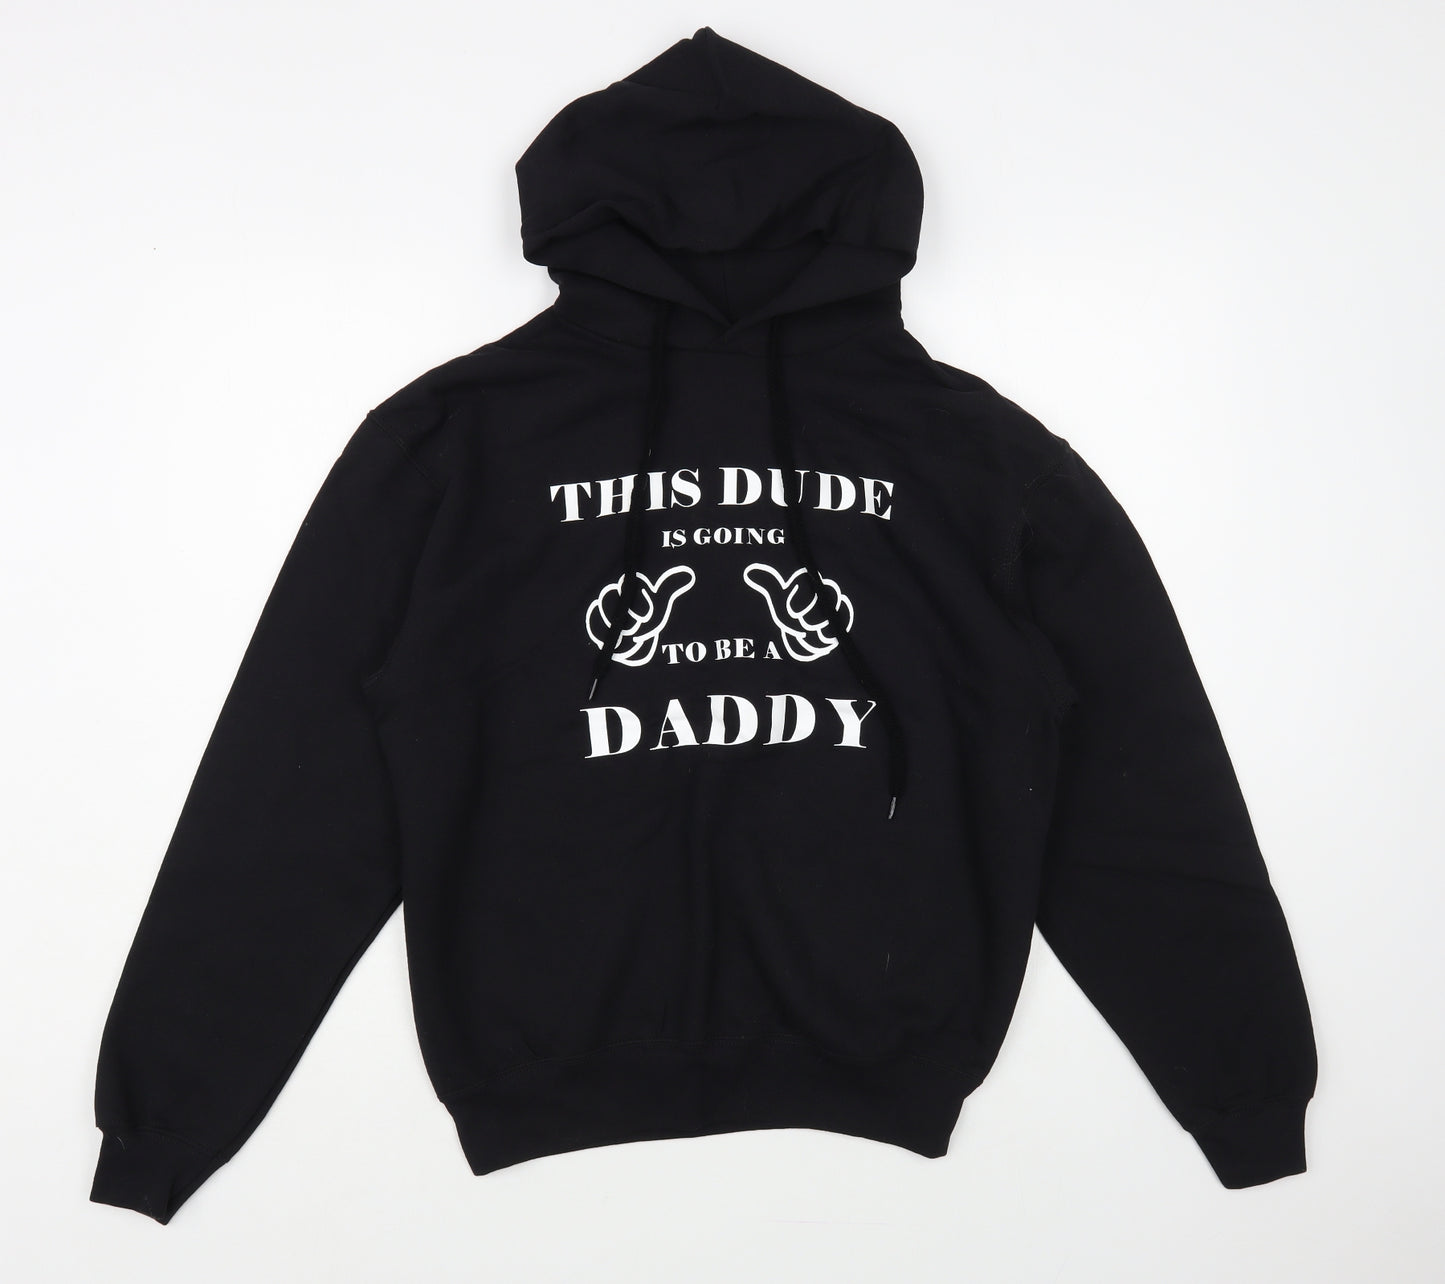 Fruit of the Loom Mens Black Cotton Pullover Hoodie Size M - Daddy